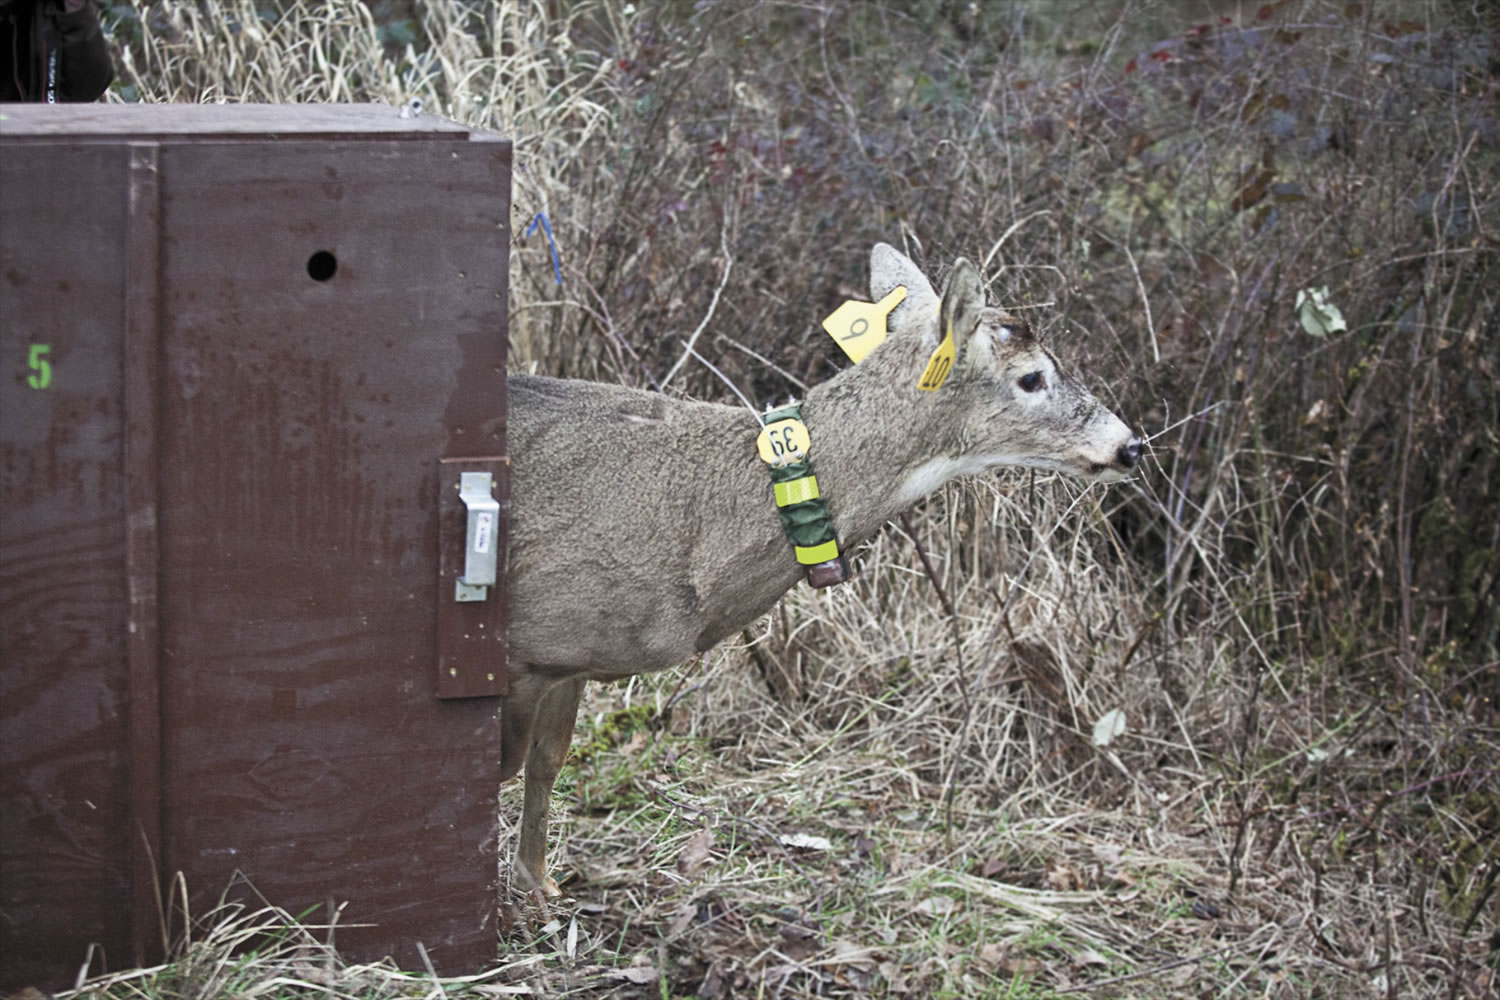 When his crate was opened in Ridgefield, the buck quickly disappeared into the brush, but radio signals indicated that he didn't go far.